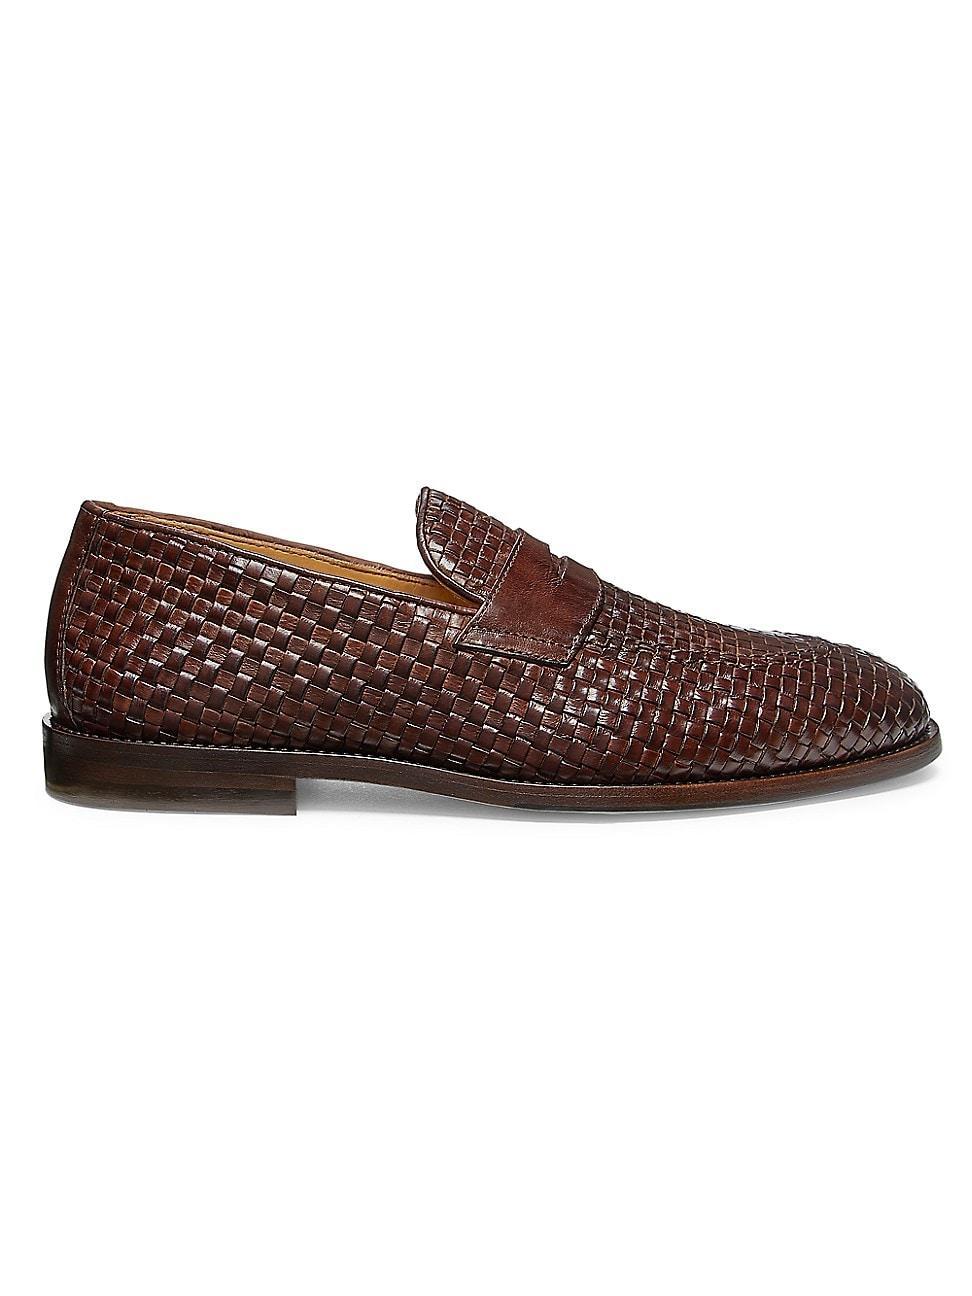 Mens Leather Woven Penny Loafers Product Image